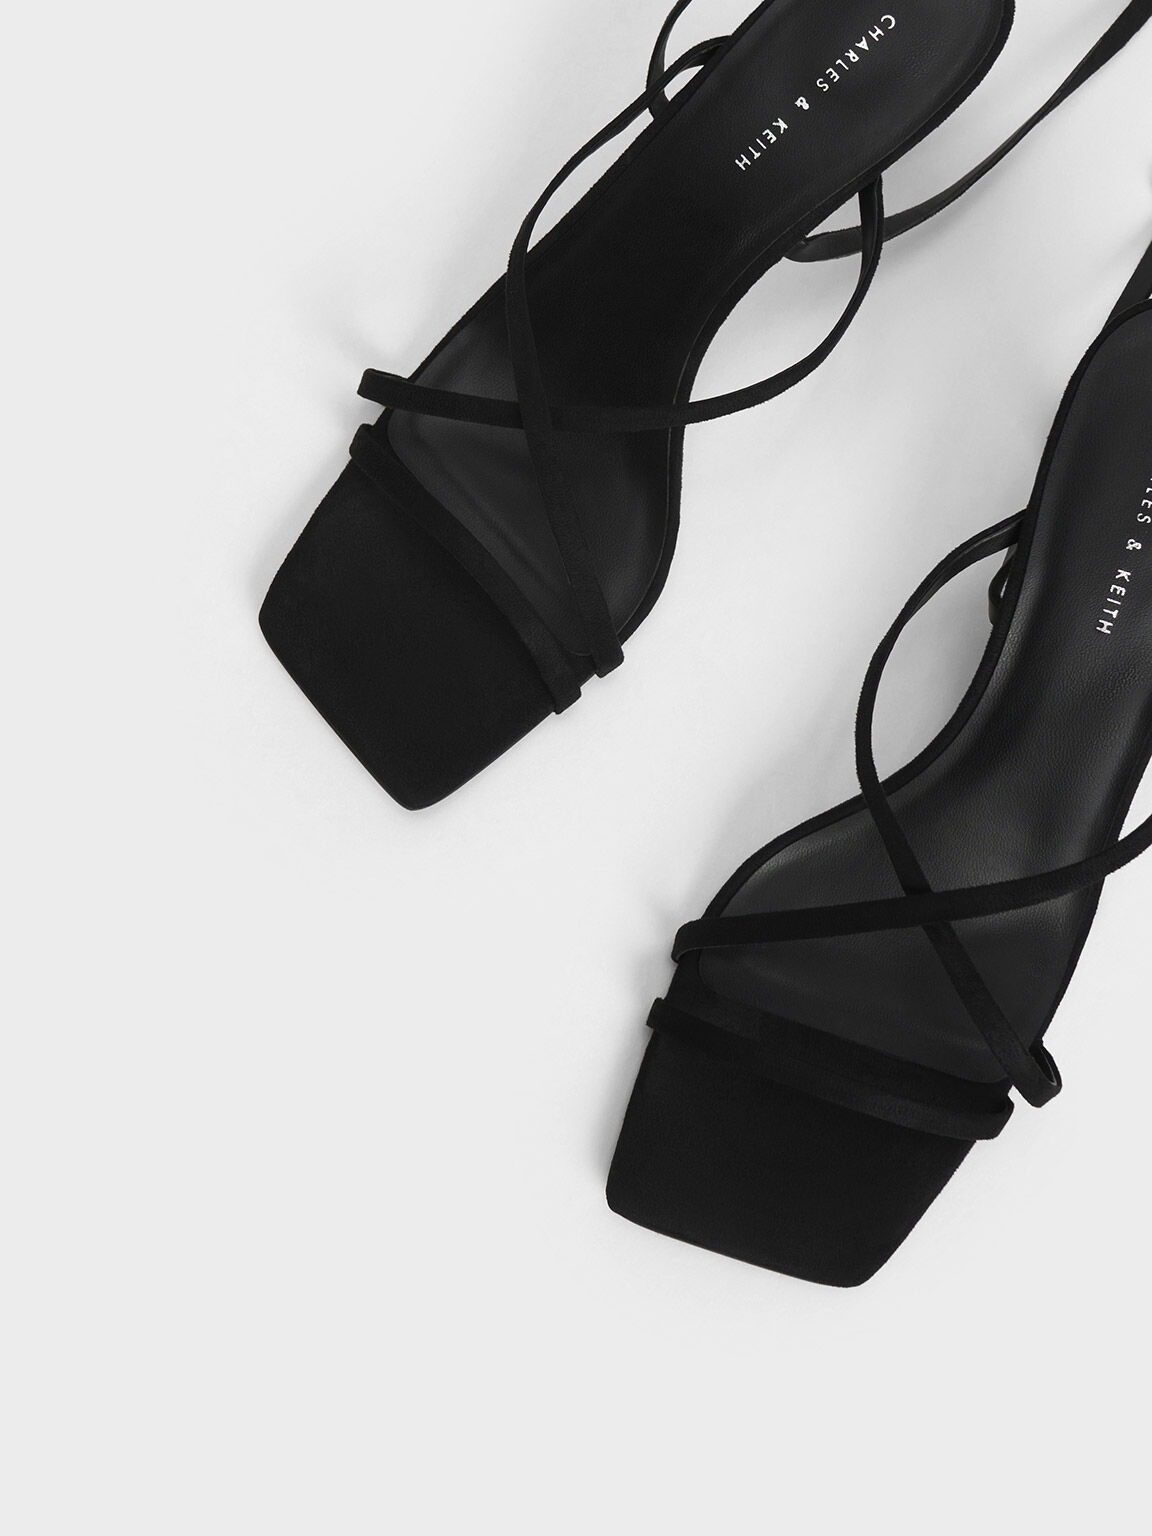 Textured Crossover Strappy Sandals, Black, hi-res